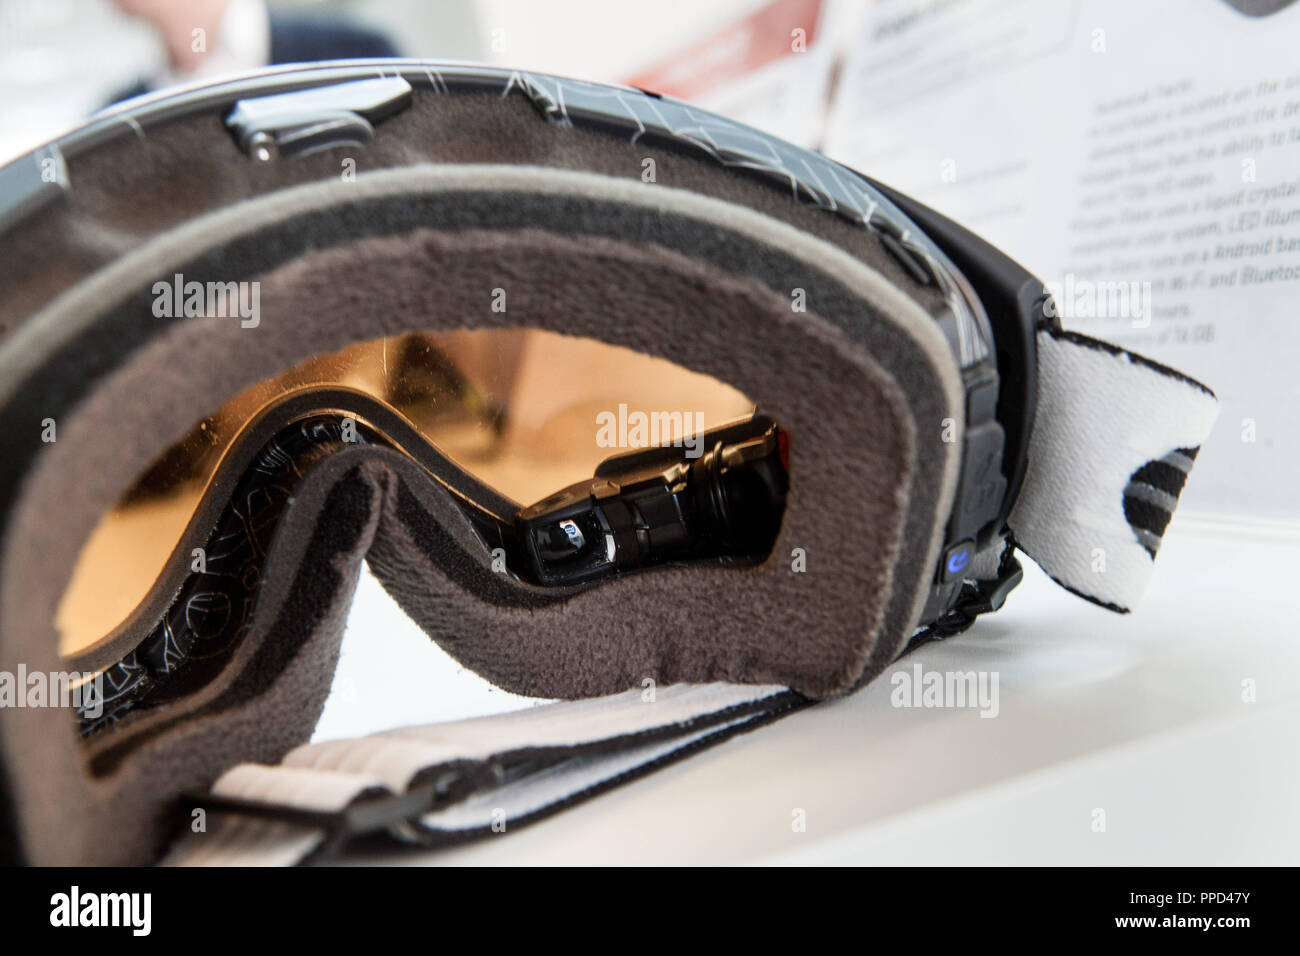 Virtual and Augmented Reality at the Internet World Fair in Riem at Recon  Snow2. The ski goggles from the Austrian supplier Evolaris can show  information on a small built-in display, about the